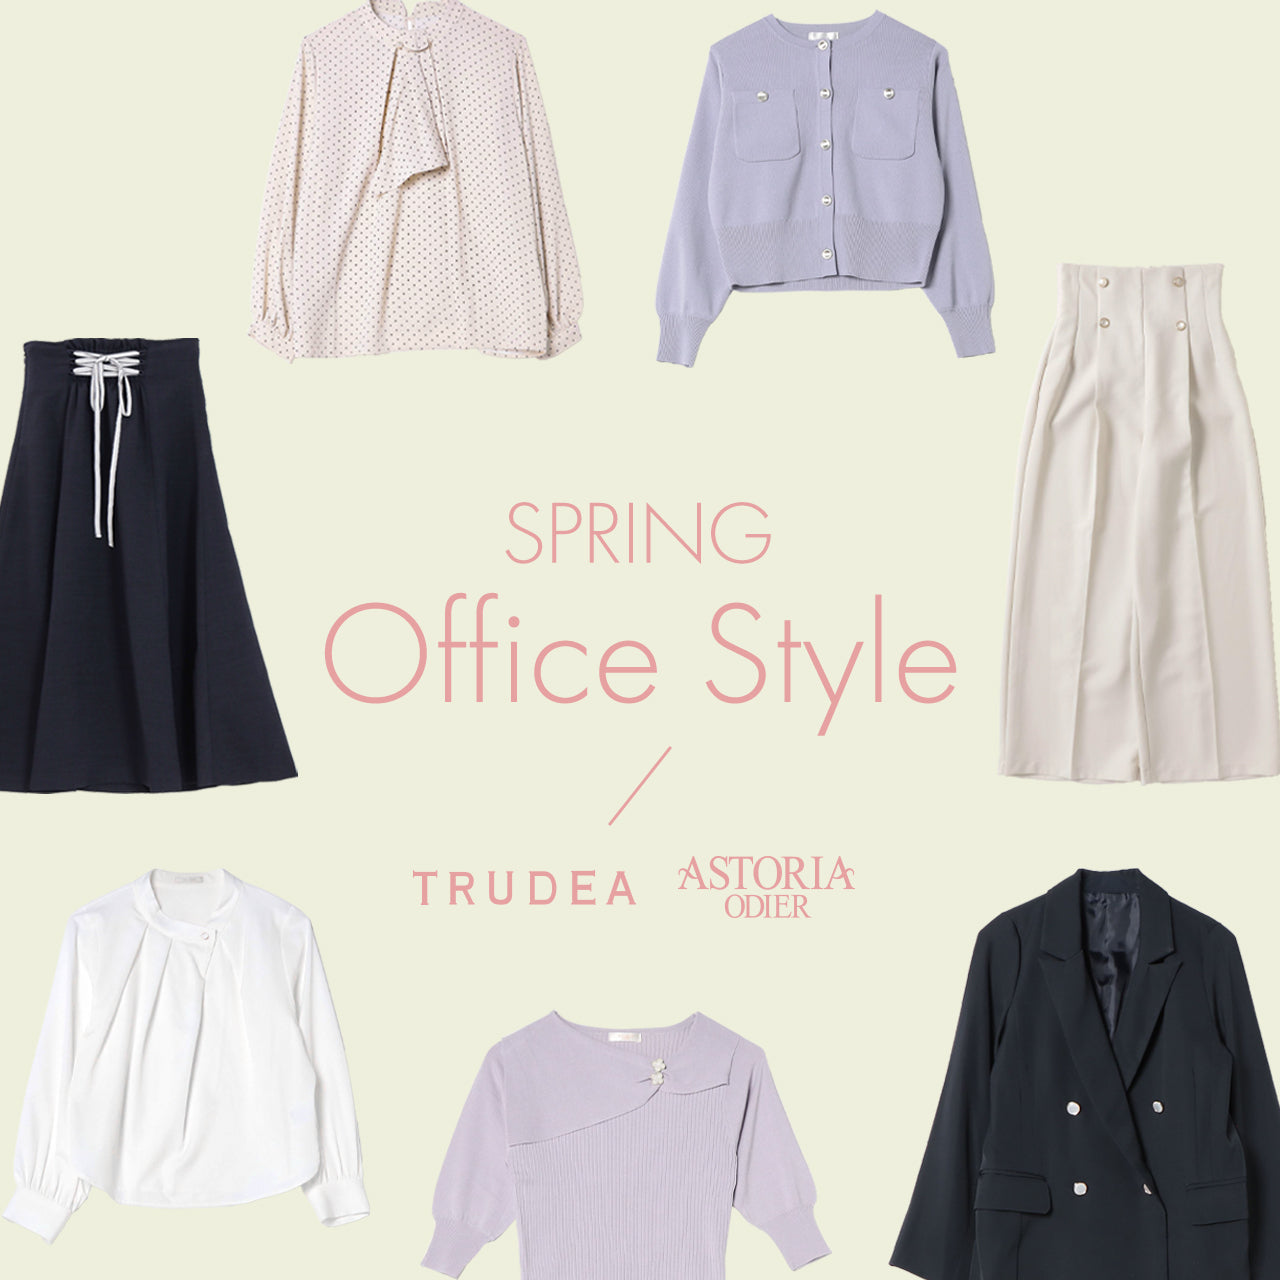 SPRING Office Style